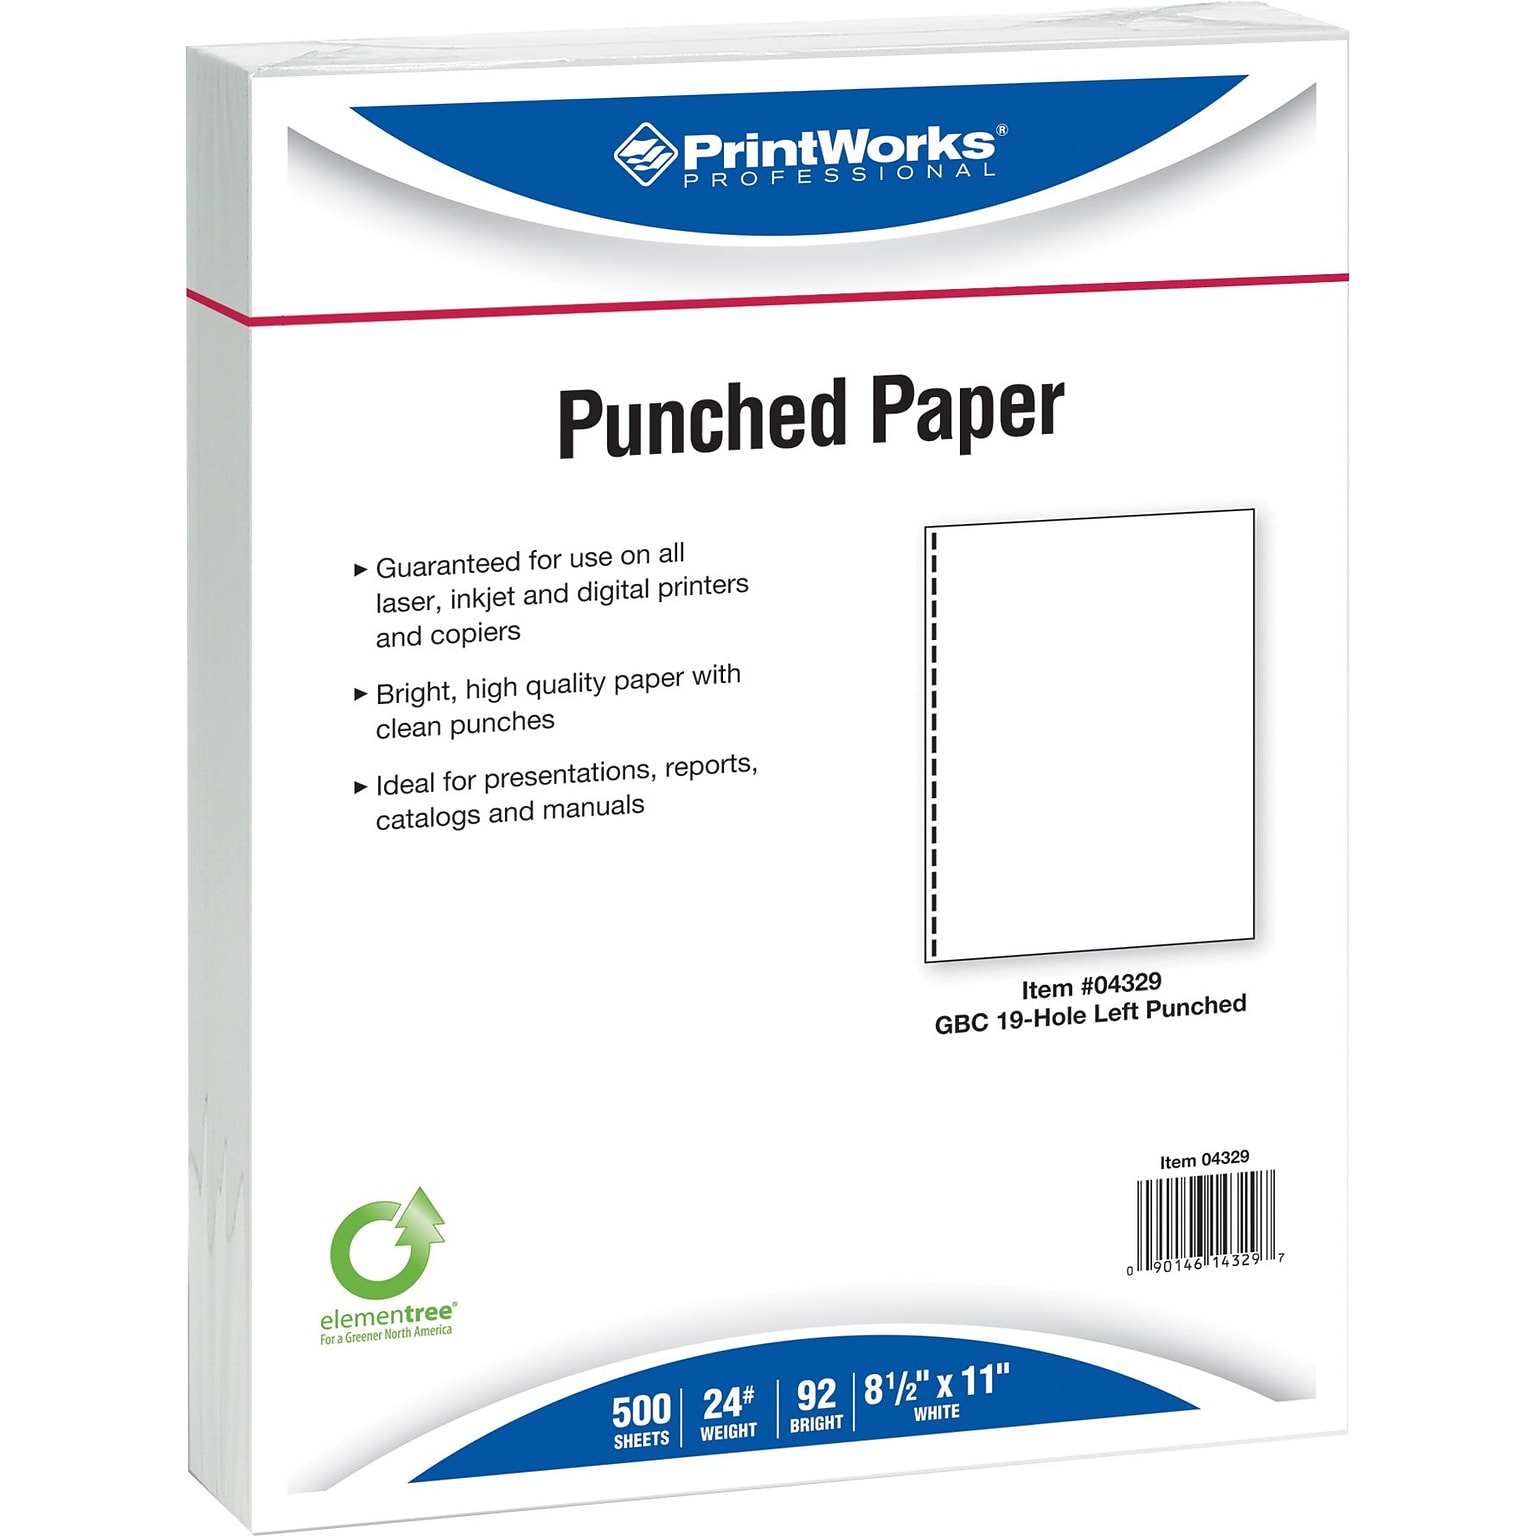 Printworks® Professional 8.5 x 11 19-Hole Punched Specialty Paper, 24 lbs., 92 Brightness, 2500 Sheets/Carton (04329)